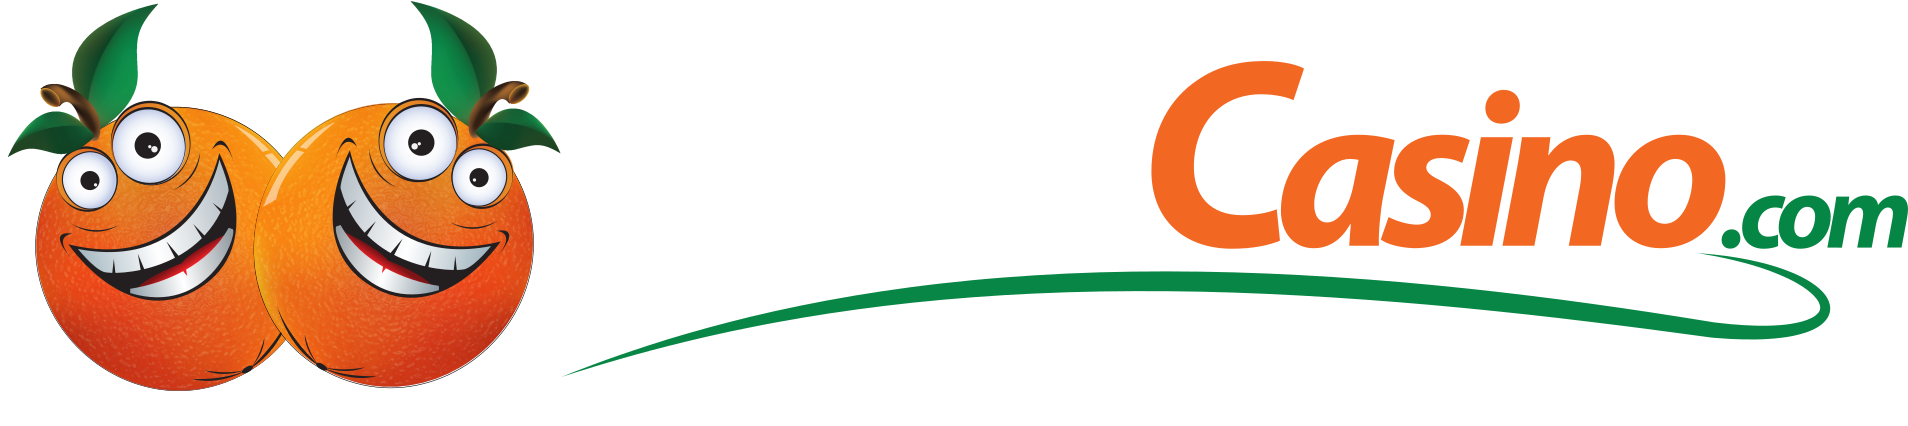 Casino as One of the Anonymous Internet Casino Websites with free play chips